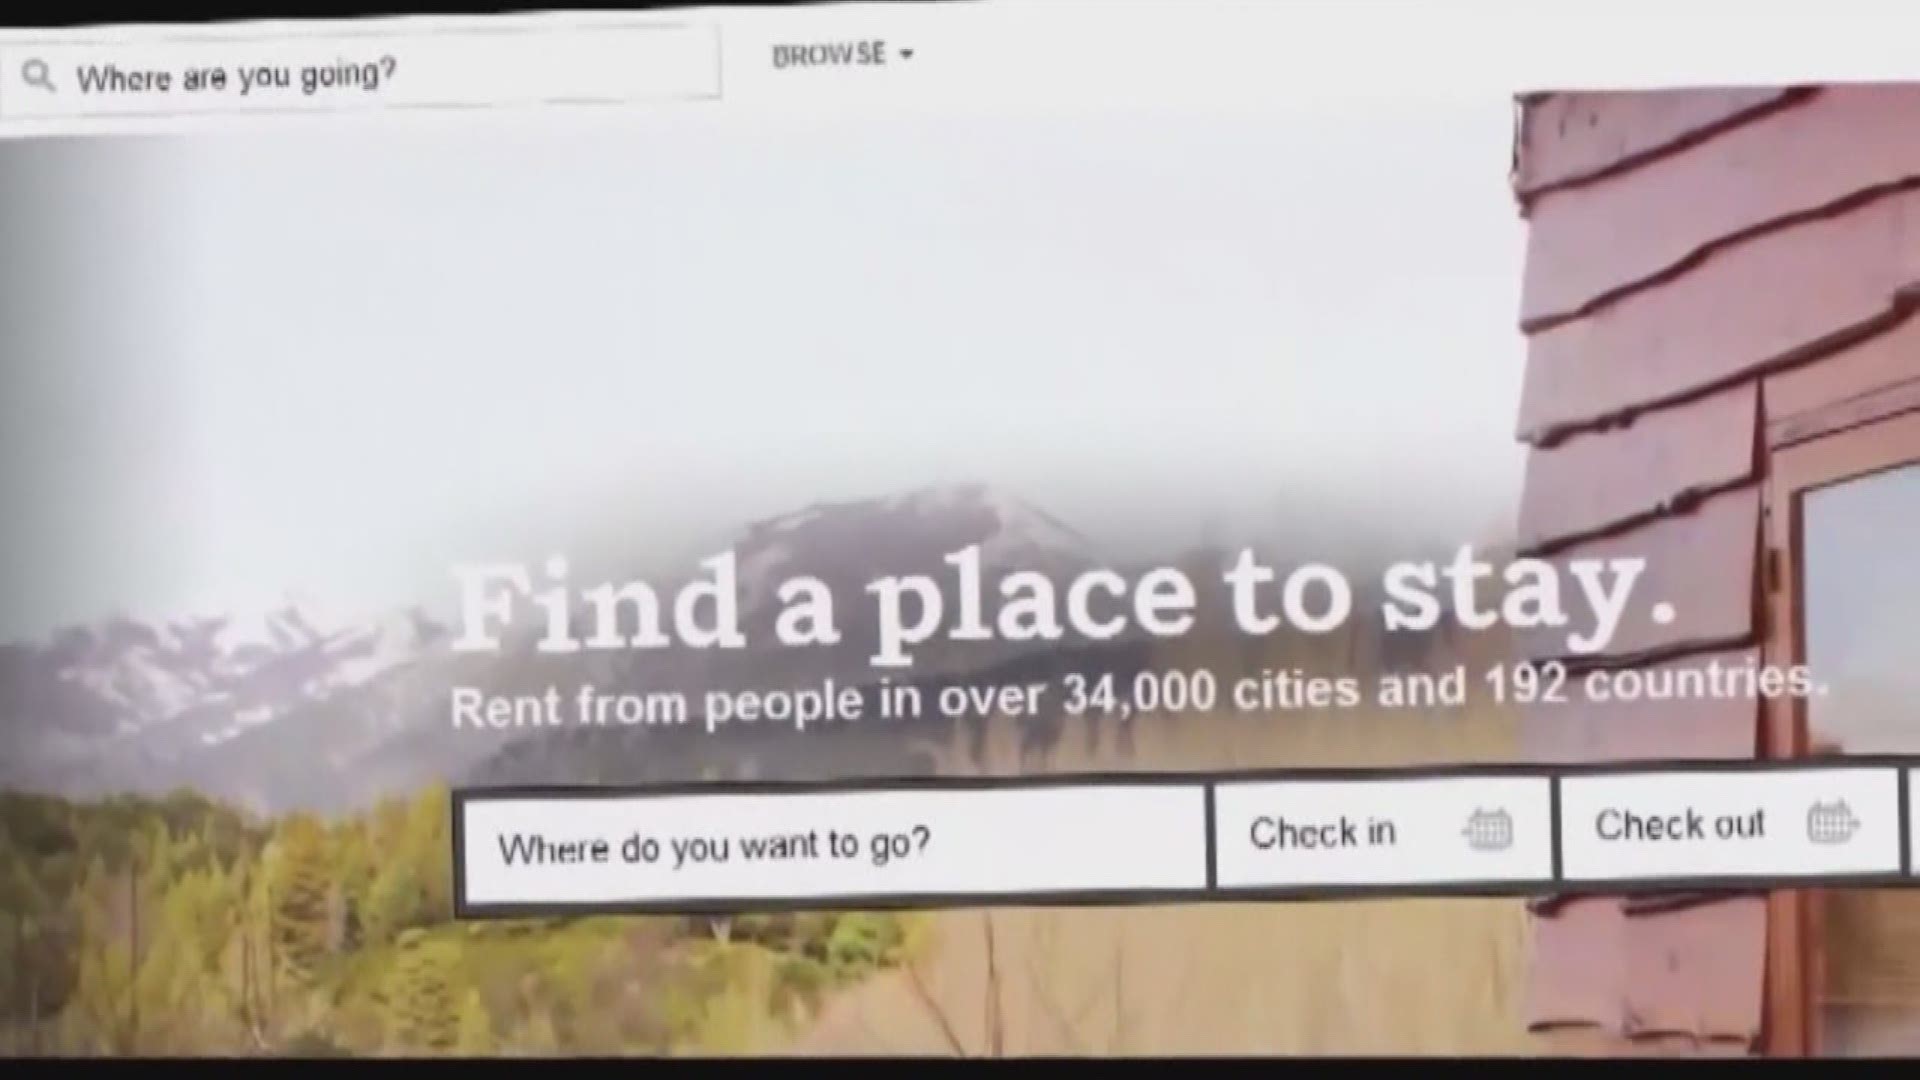 A look at which Florida cities rank high for Airbnb destinations.